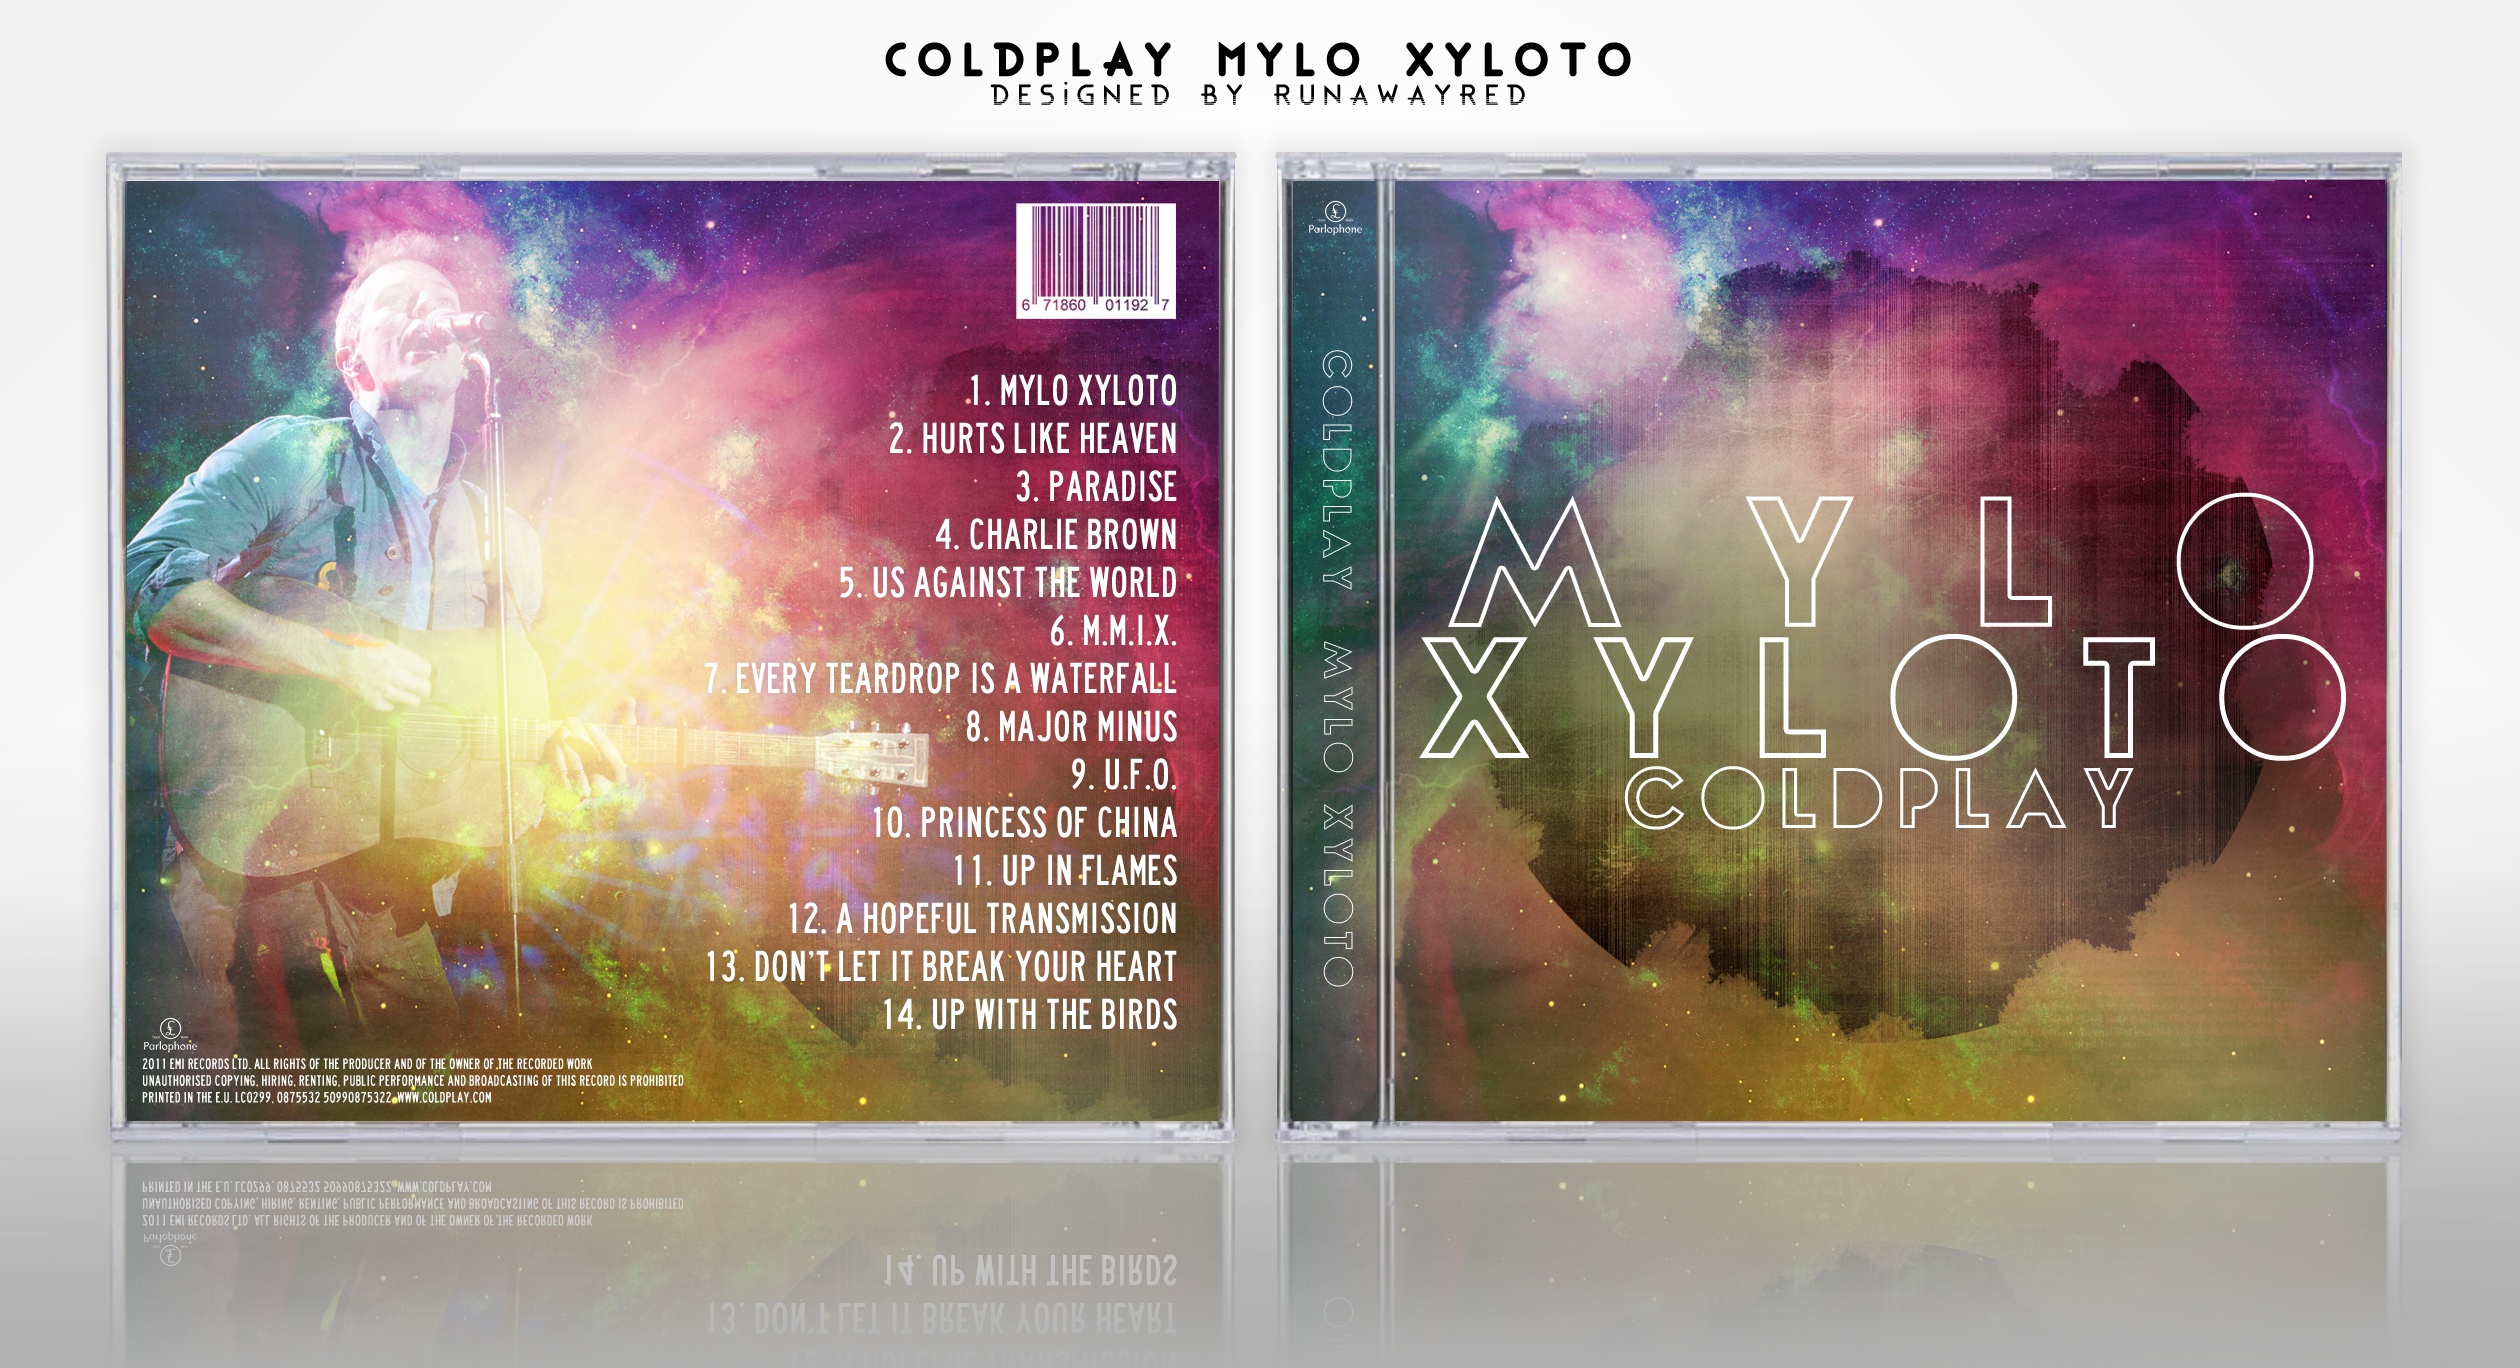 Coldplay - Mylo Xyloto box cover